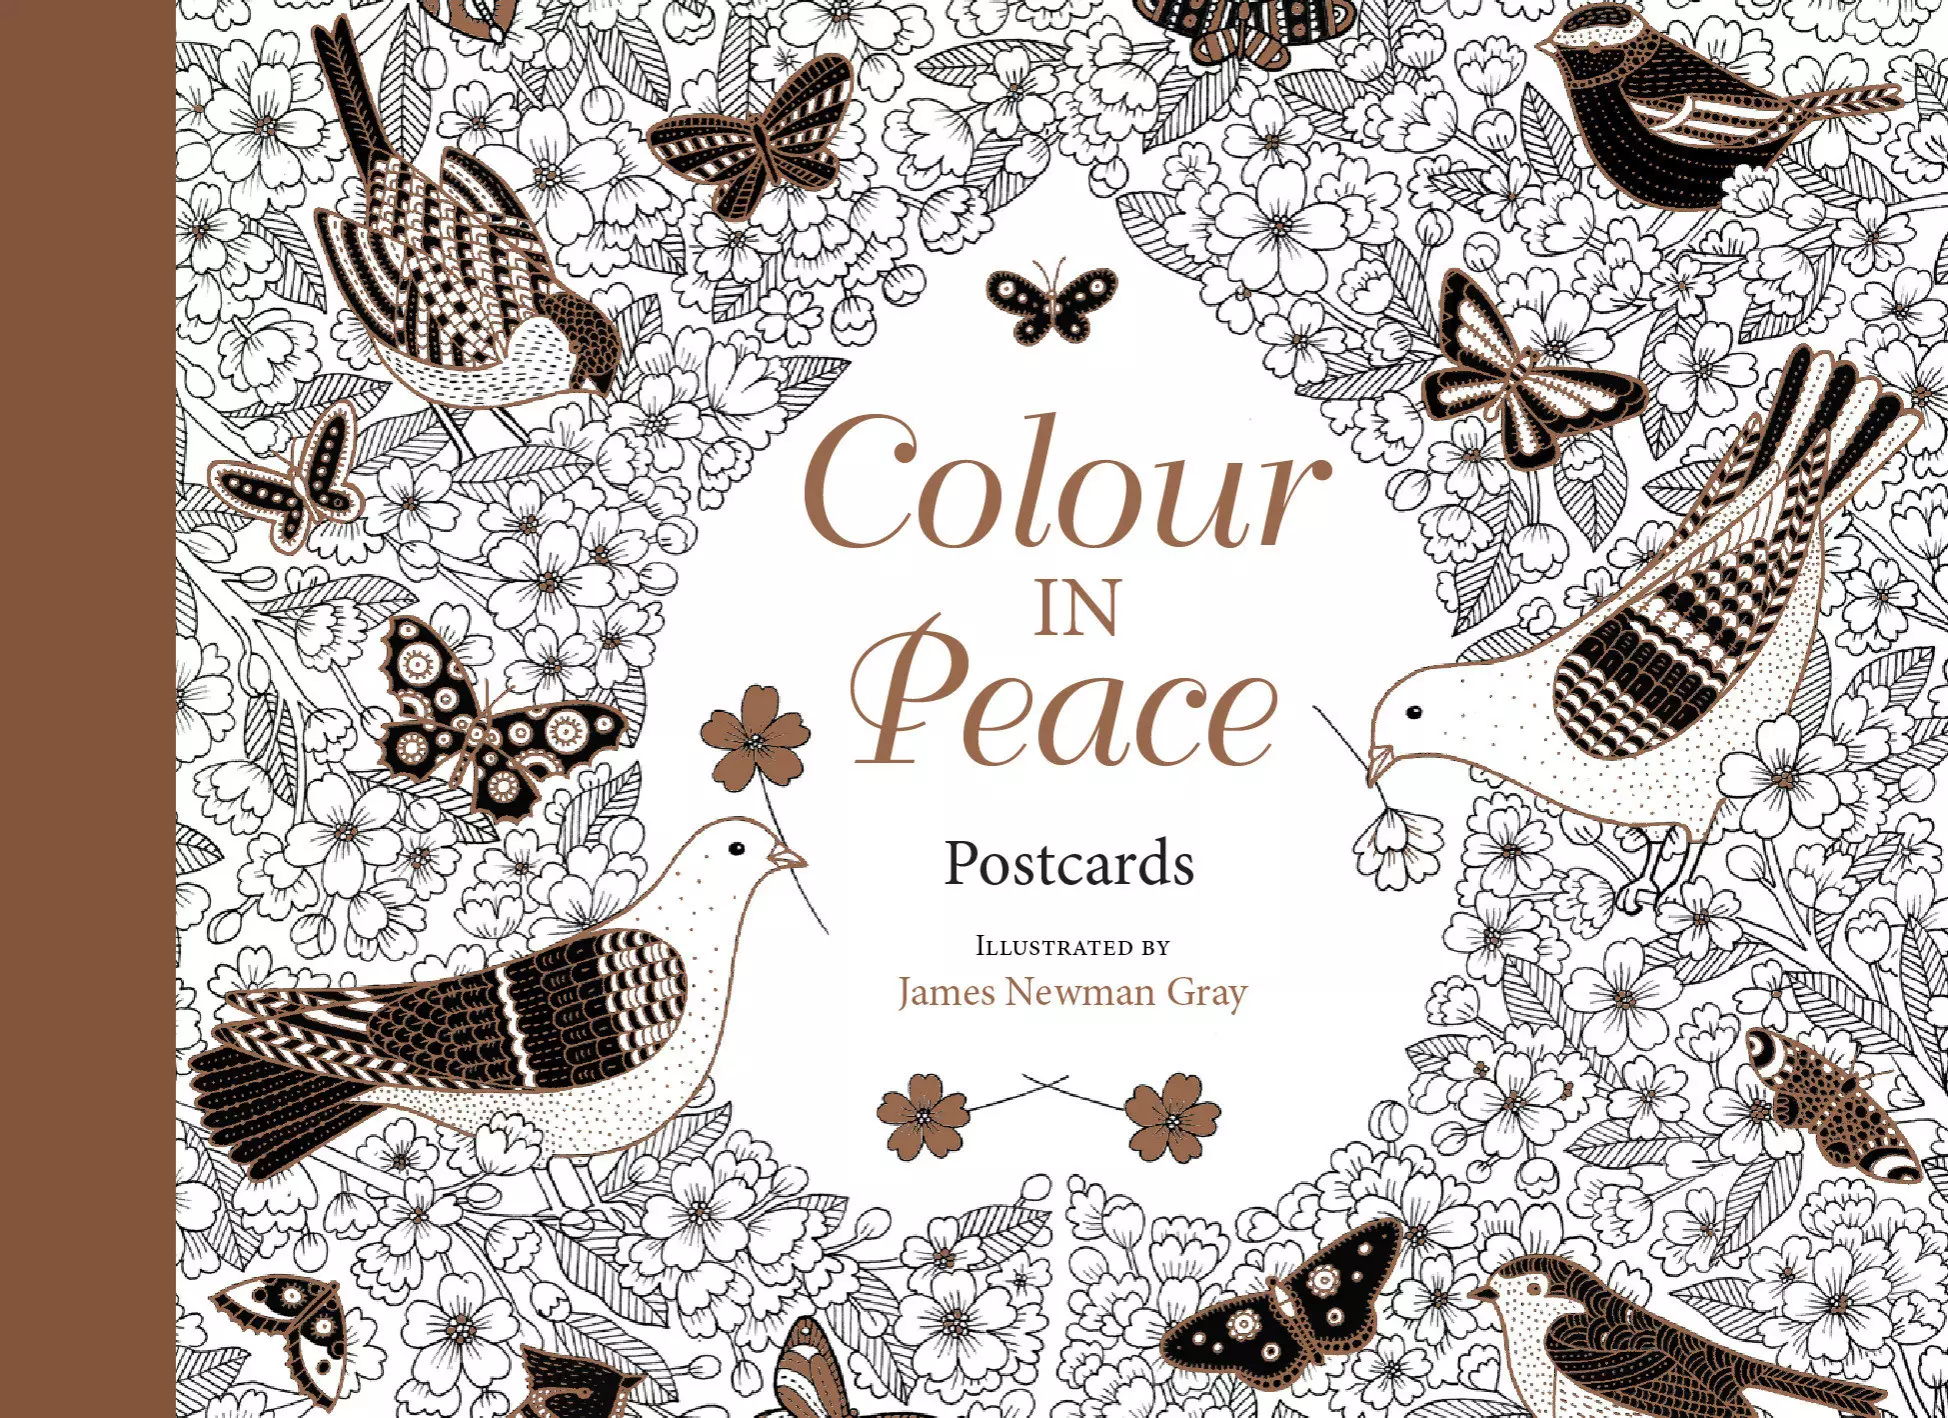 Colour in Peace Postcards